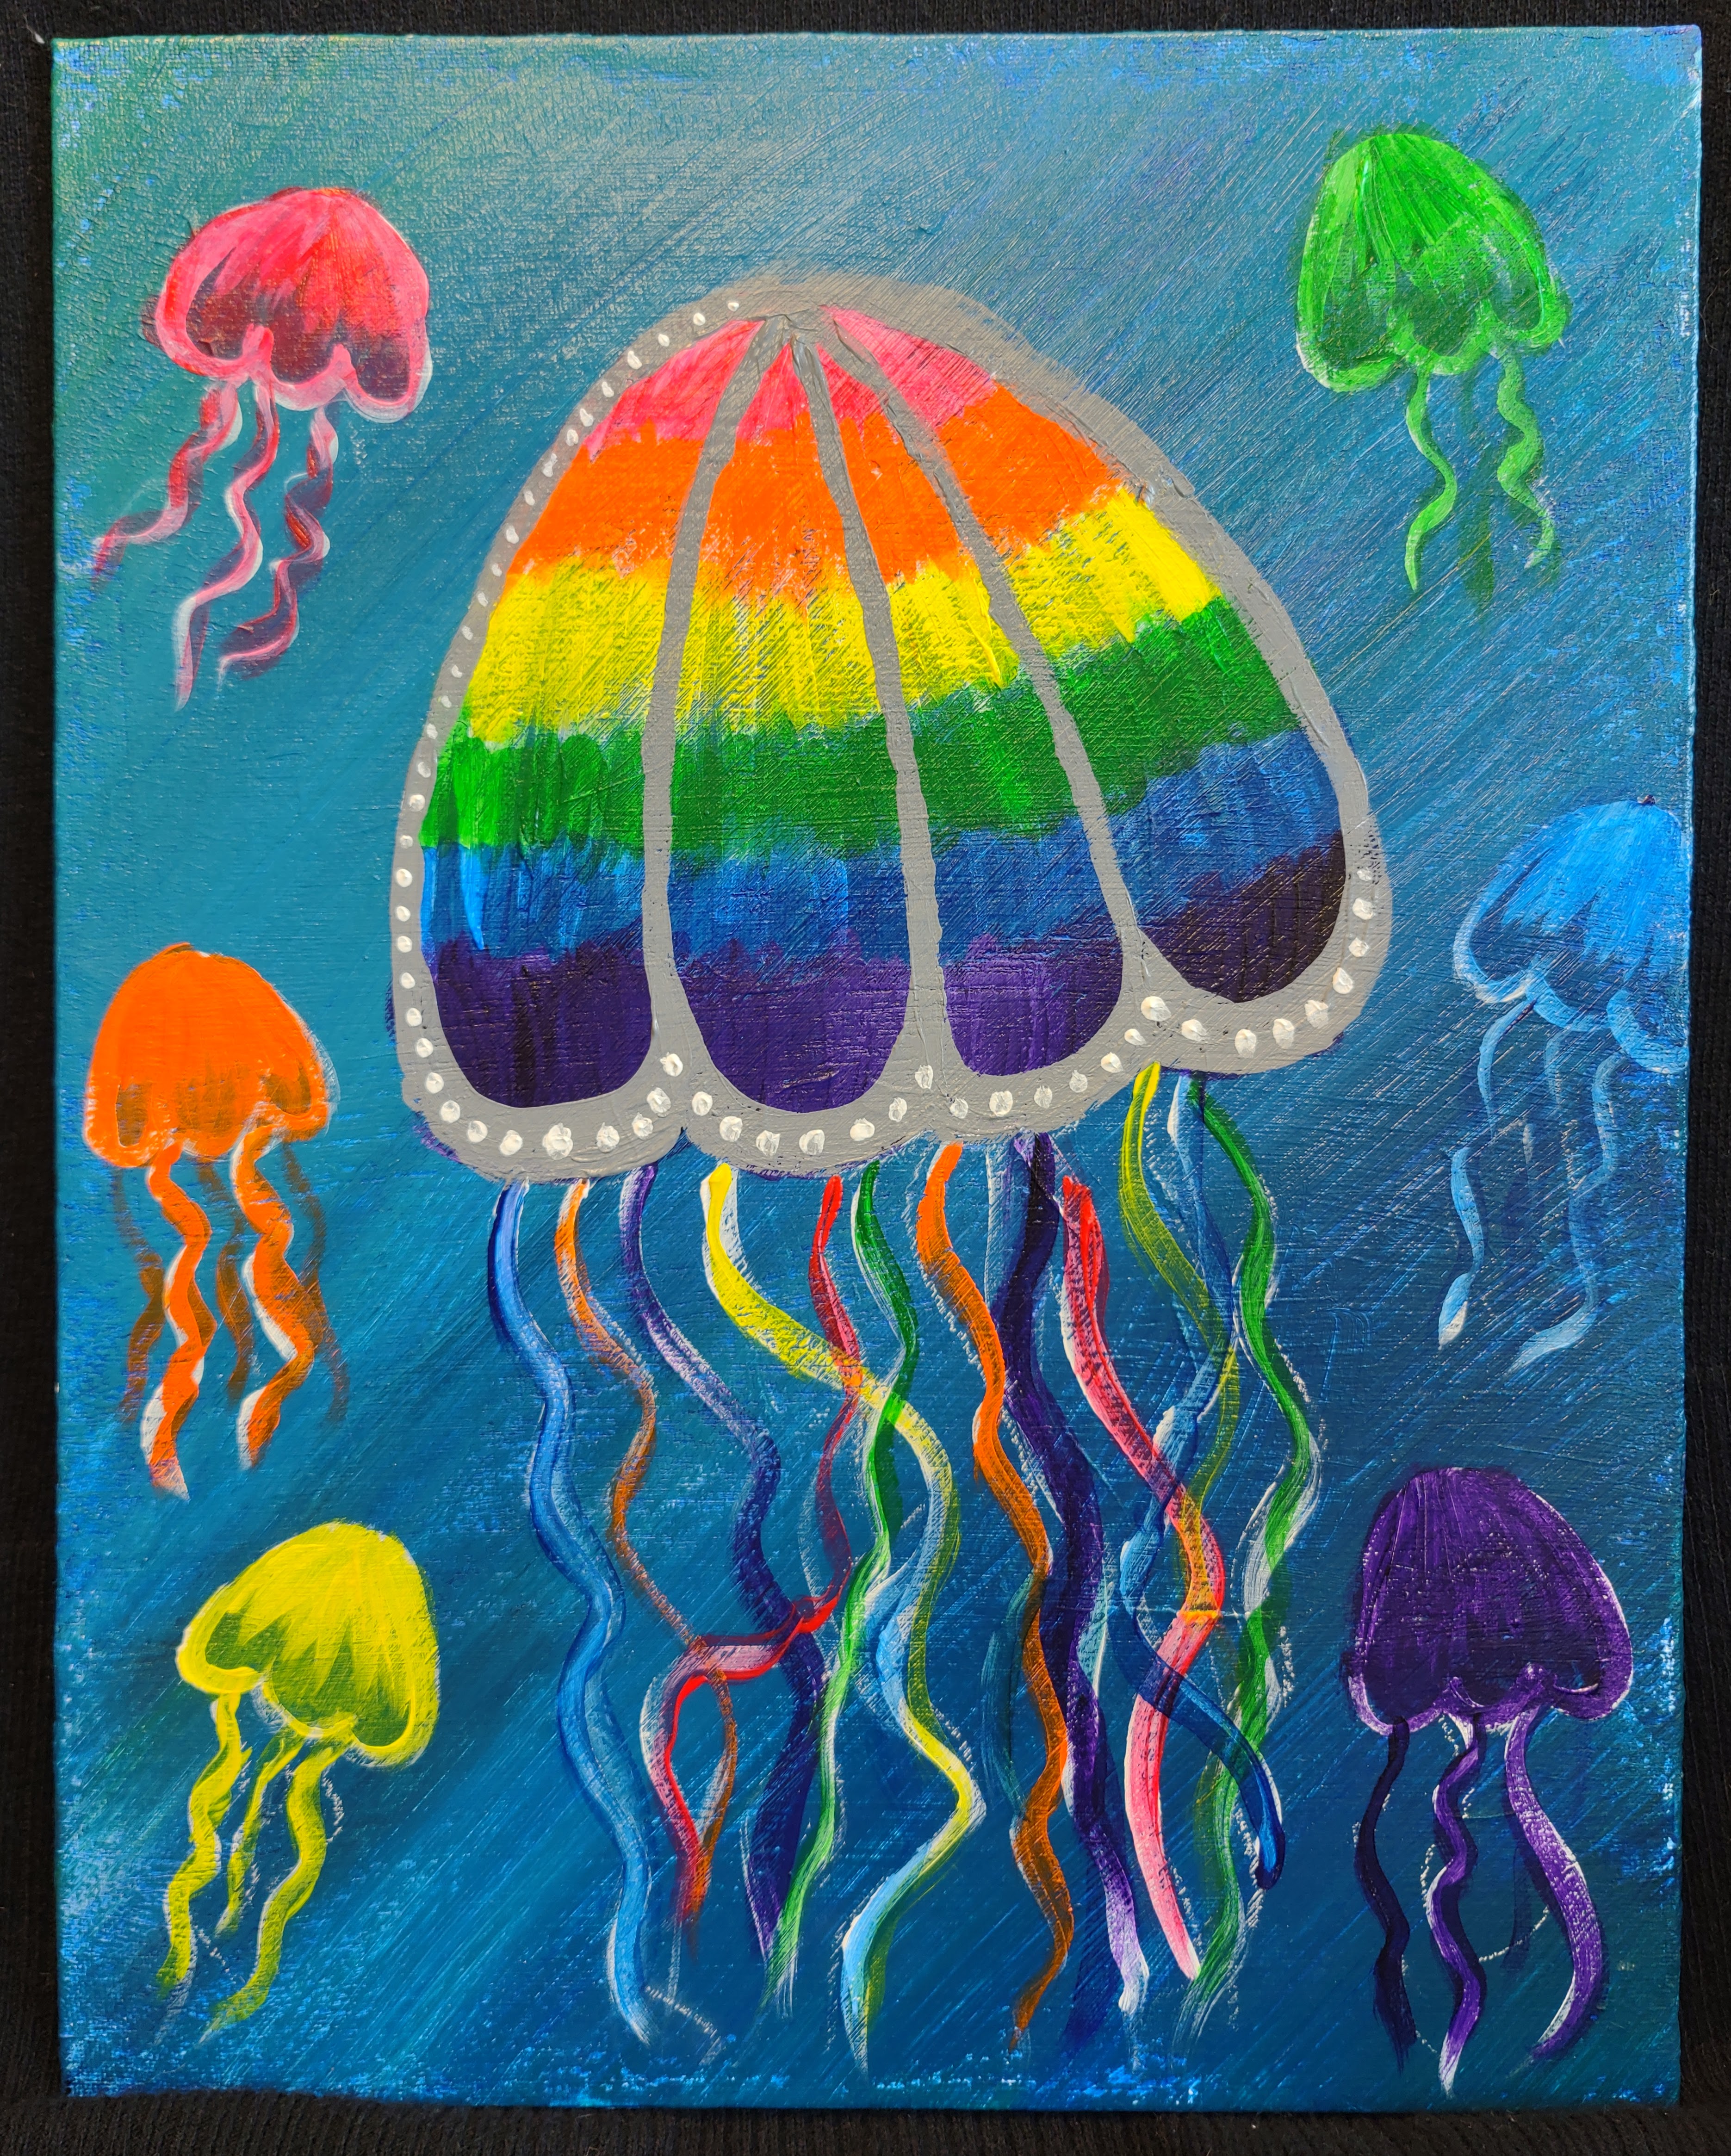 A large rainbow jellyfish is painted over a blue/green background. There are six smaller jellyfish that are red, orange, yellow, green, blue, and purple.